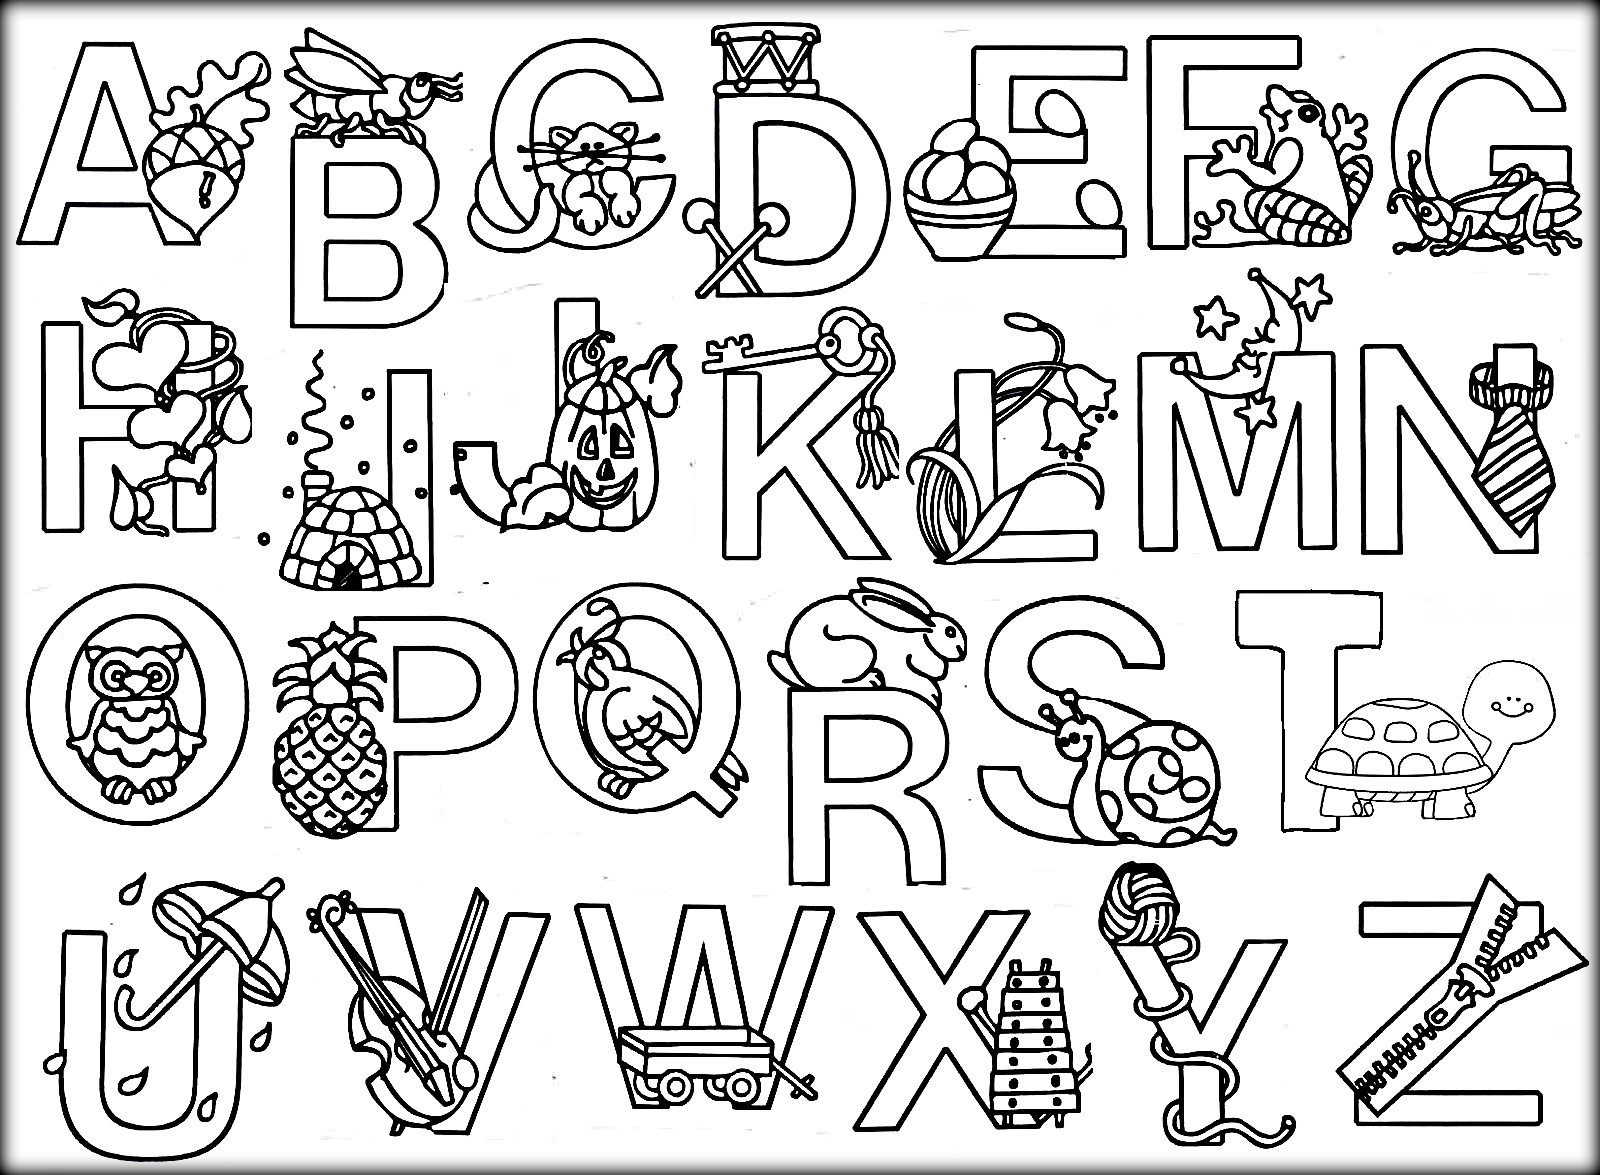 Animal Alphabet Coloring Pages Free at Free